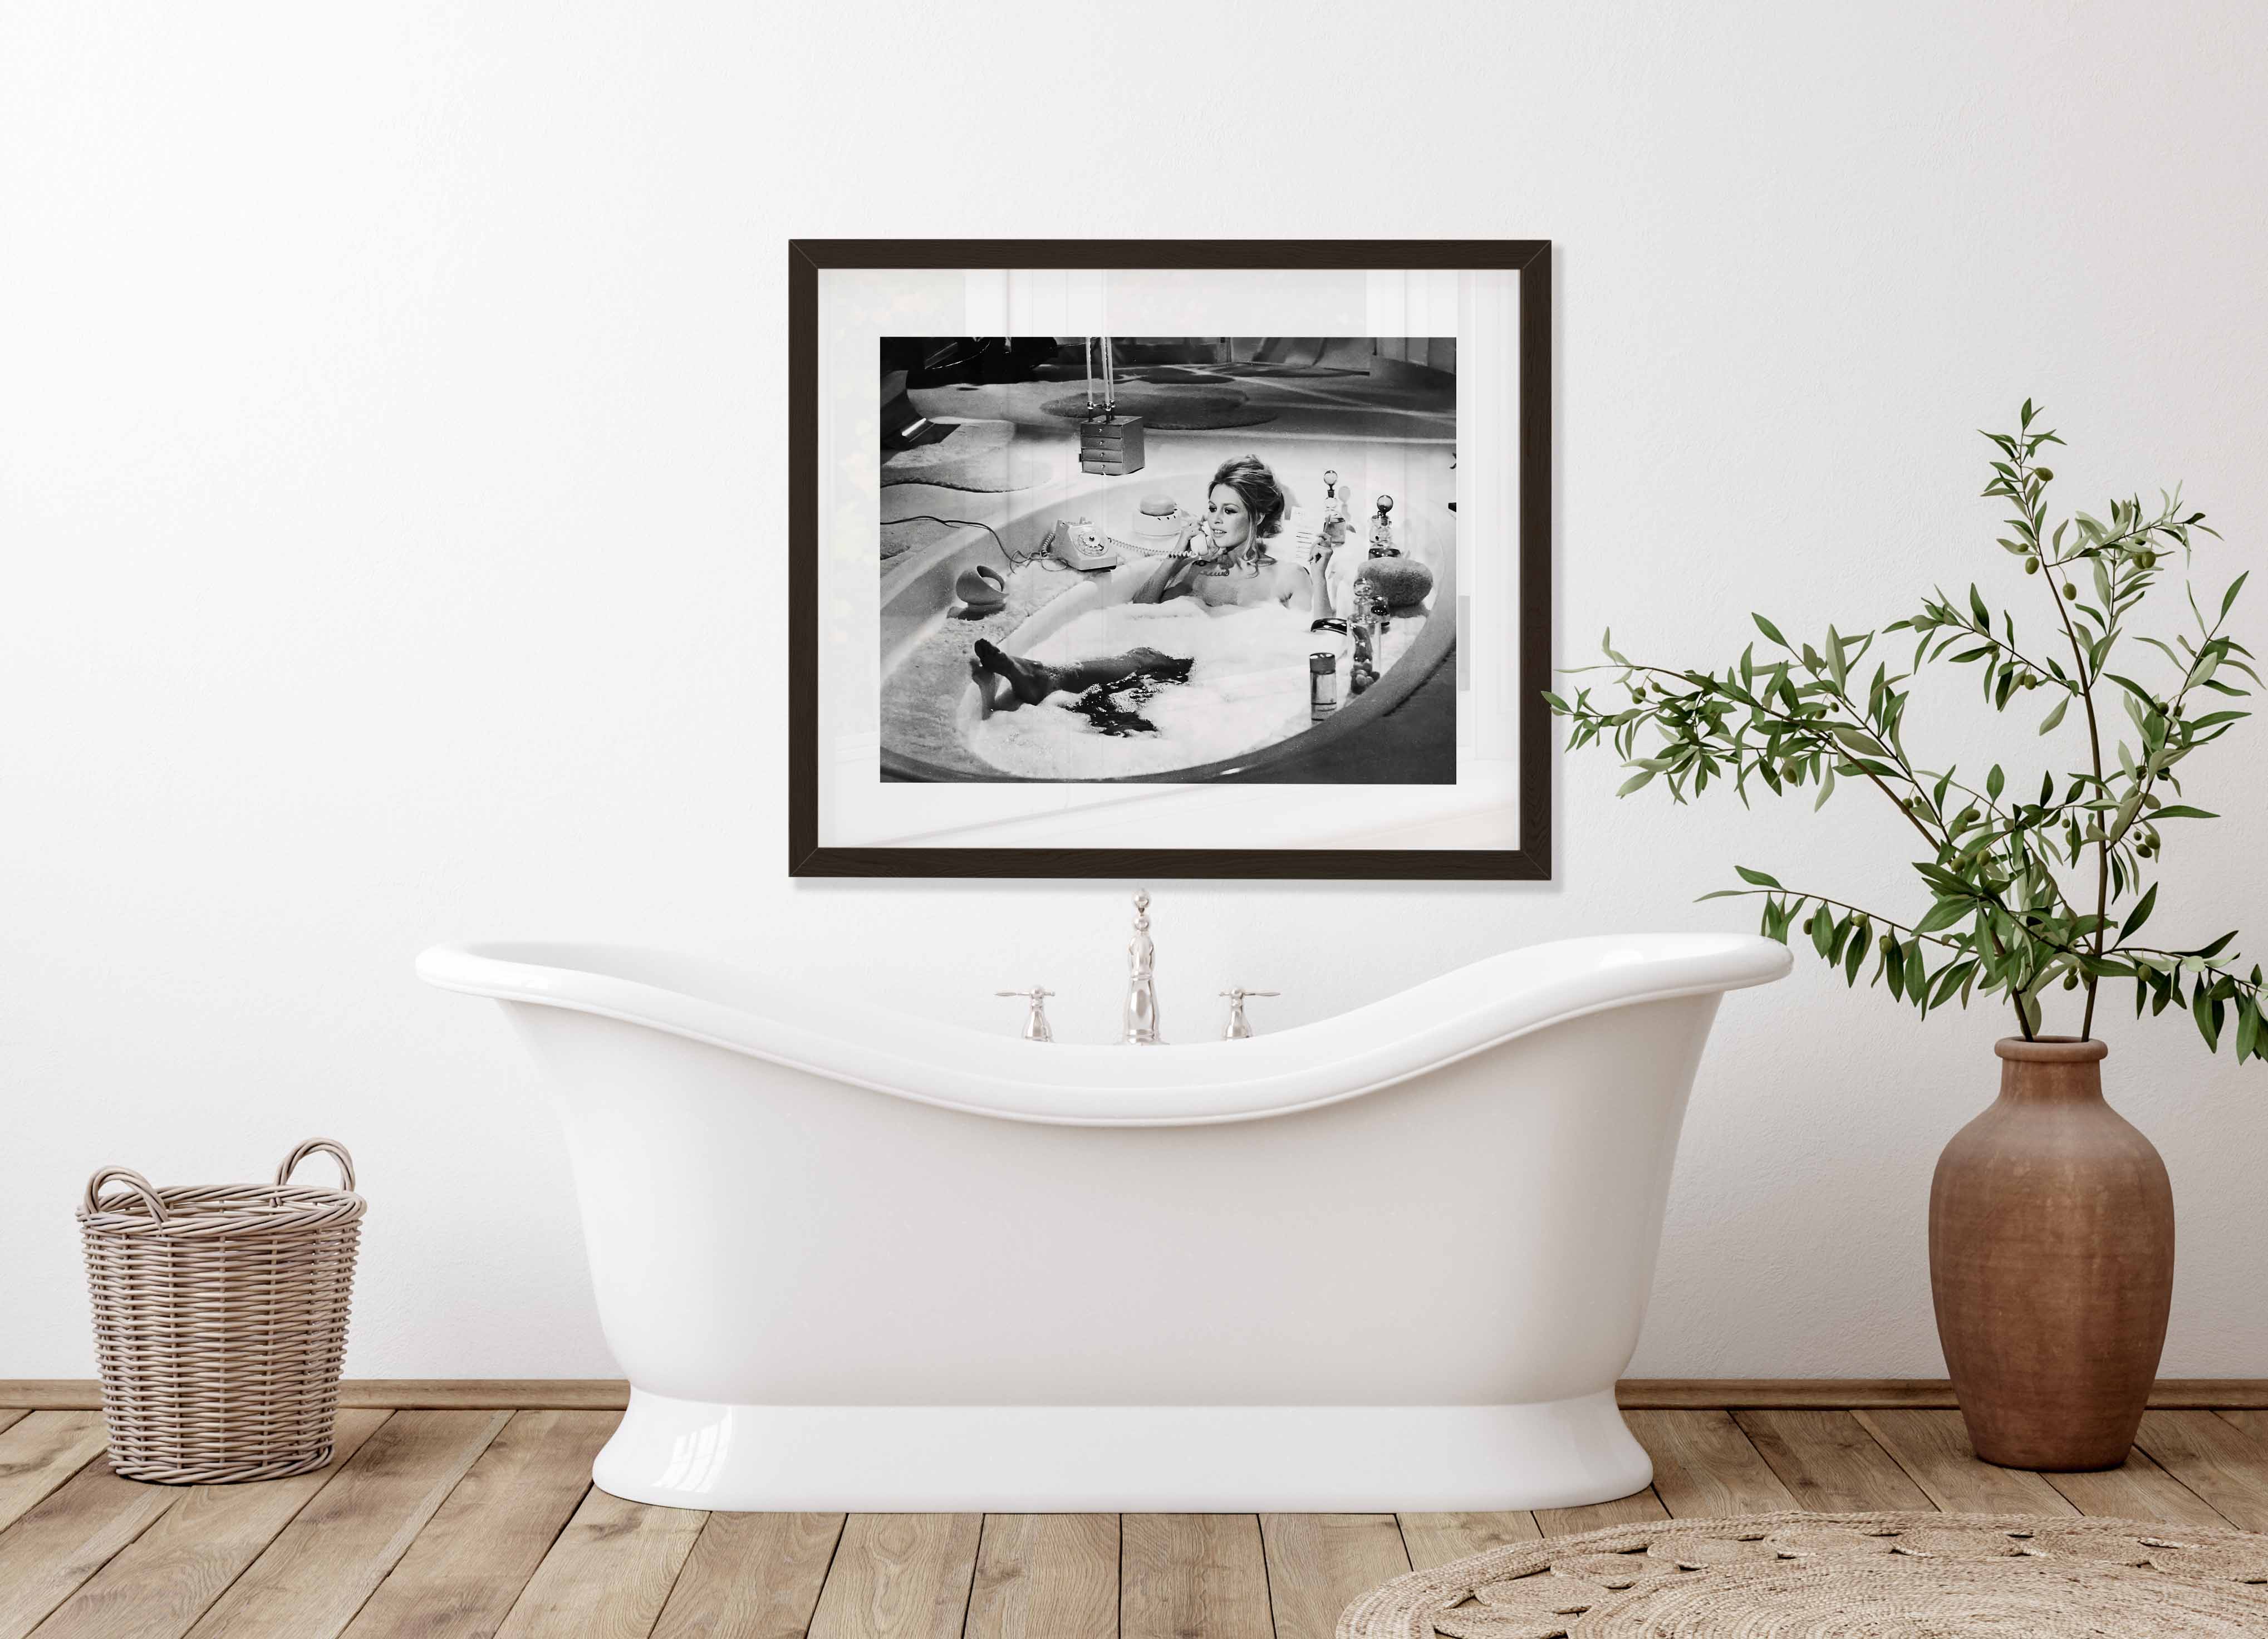 Black and white photography print of Brigitte Bardot in a bathtub - French Movie-Bathtub scene "L’Ours et la Poupée 1970" (The Bear and the Doll)